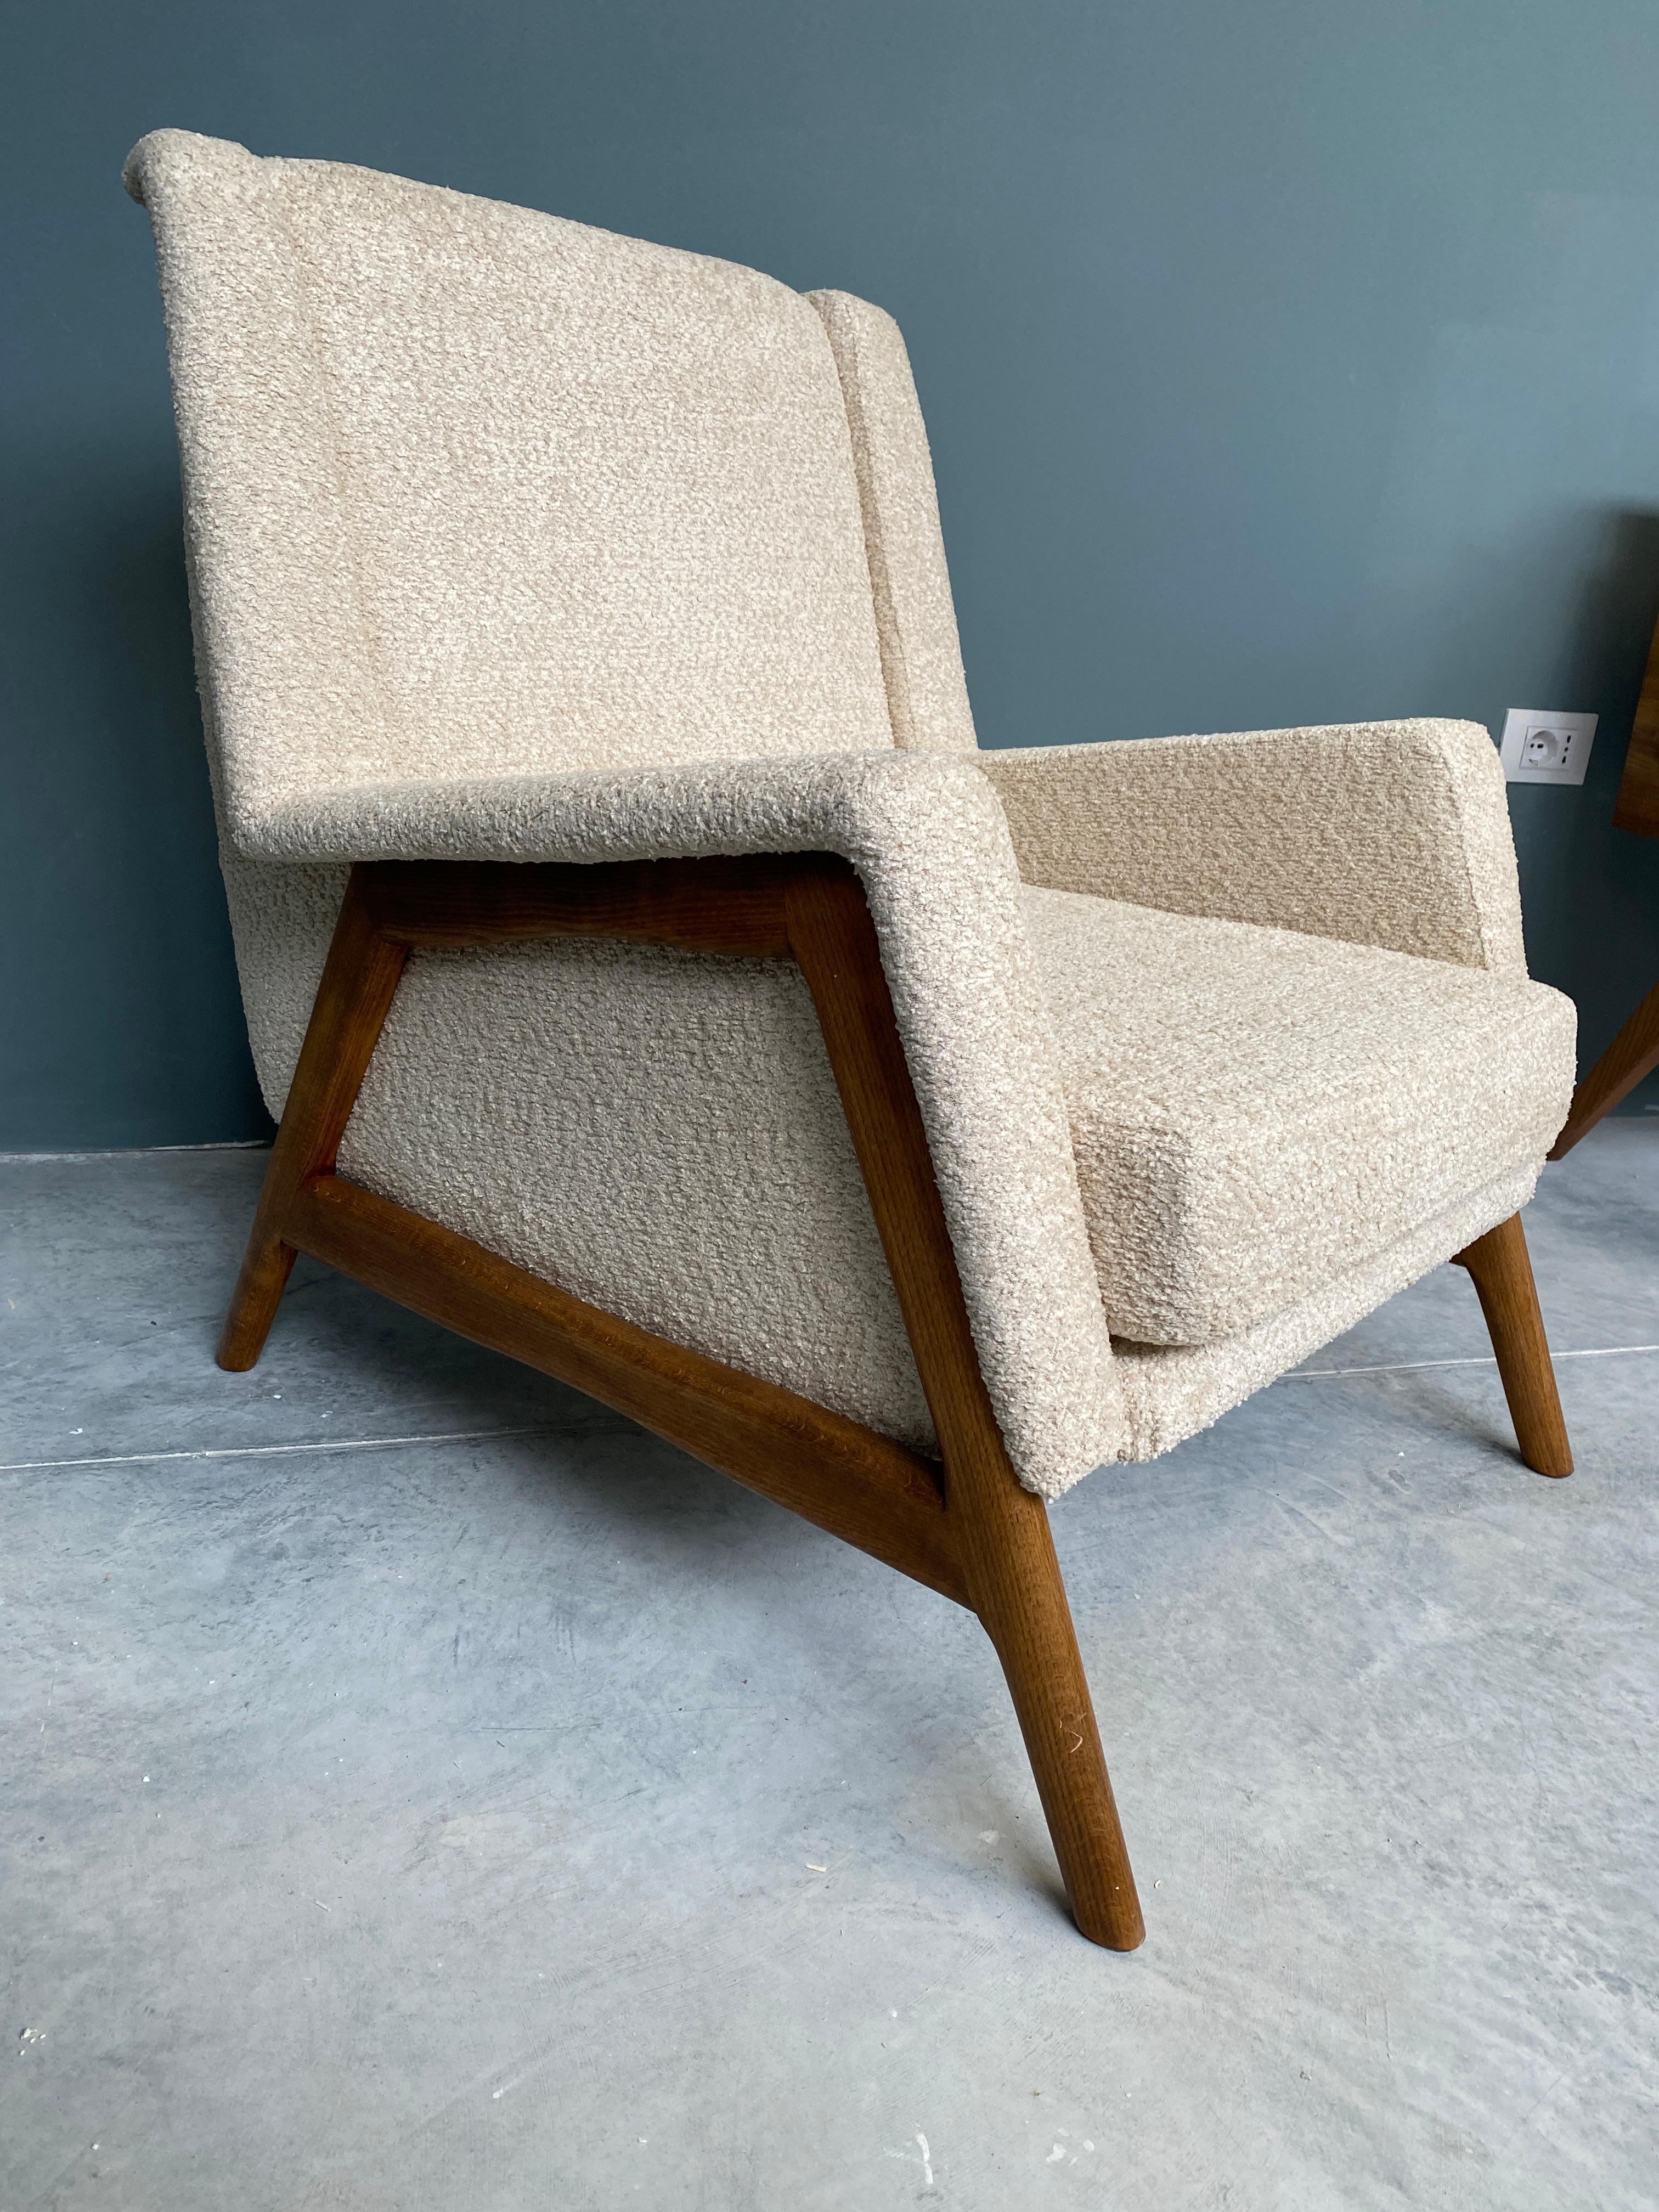 Beautiful armchair upholstered with creamy white chenille, designed and handcrafted by us with structure in solid wood, legs and armrests.
It is an object of high quality and refinement, ideal for giving elegance to your environments.
An object of